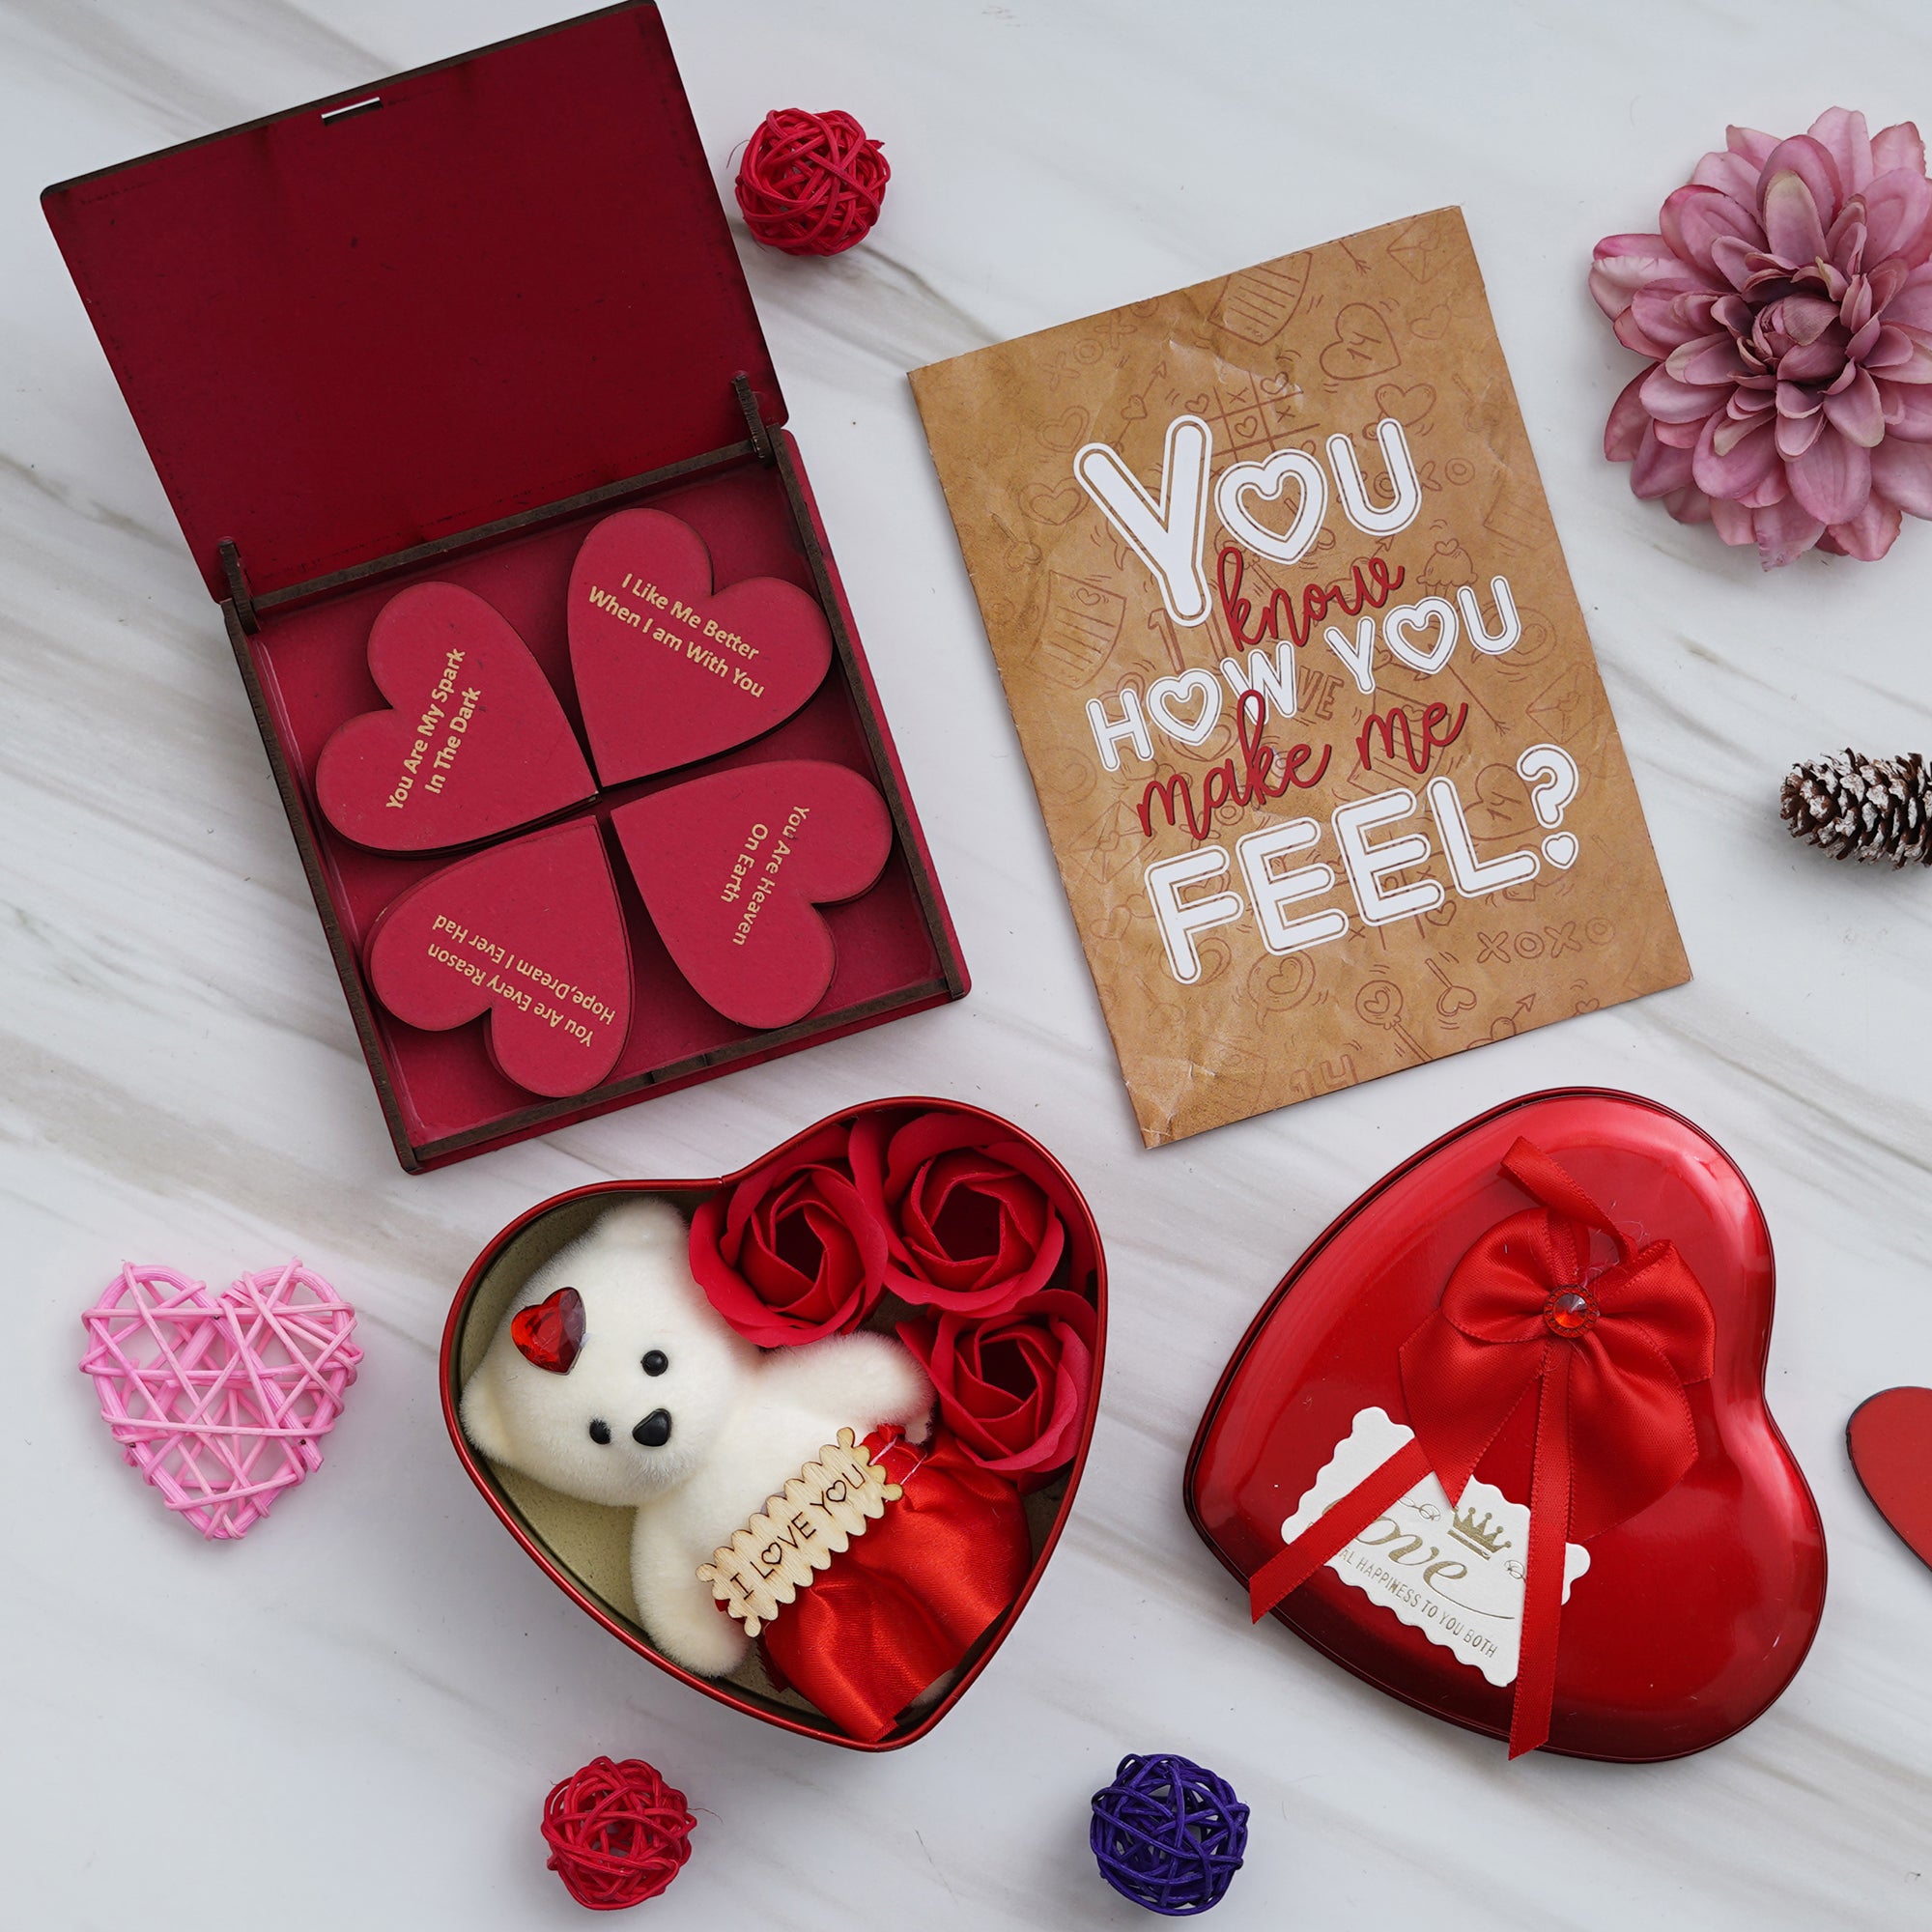 Valentine Combo of Card, Heart Shaped Gift Box Set with White Teddy and Red Roses, "20 Reasons Why I Love You" Printed on Little Red Hearts Decorative Wooden Gift Set Box